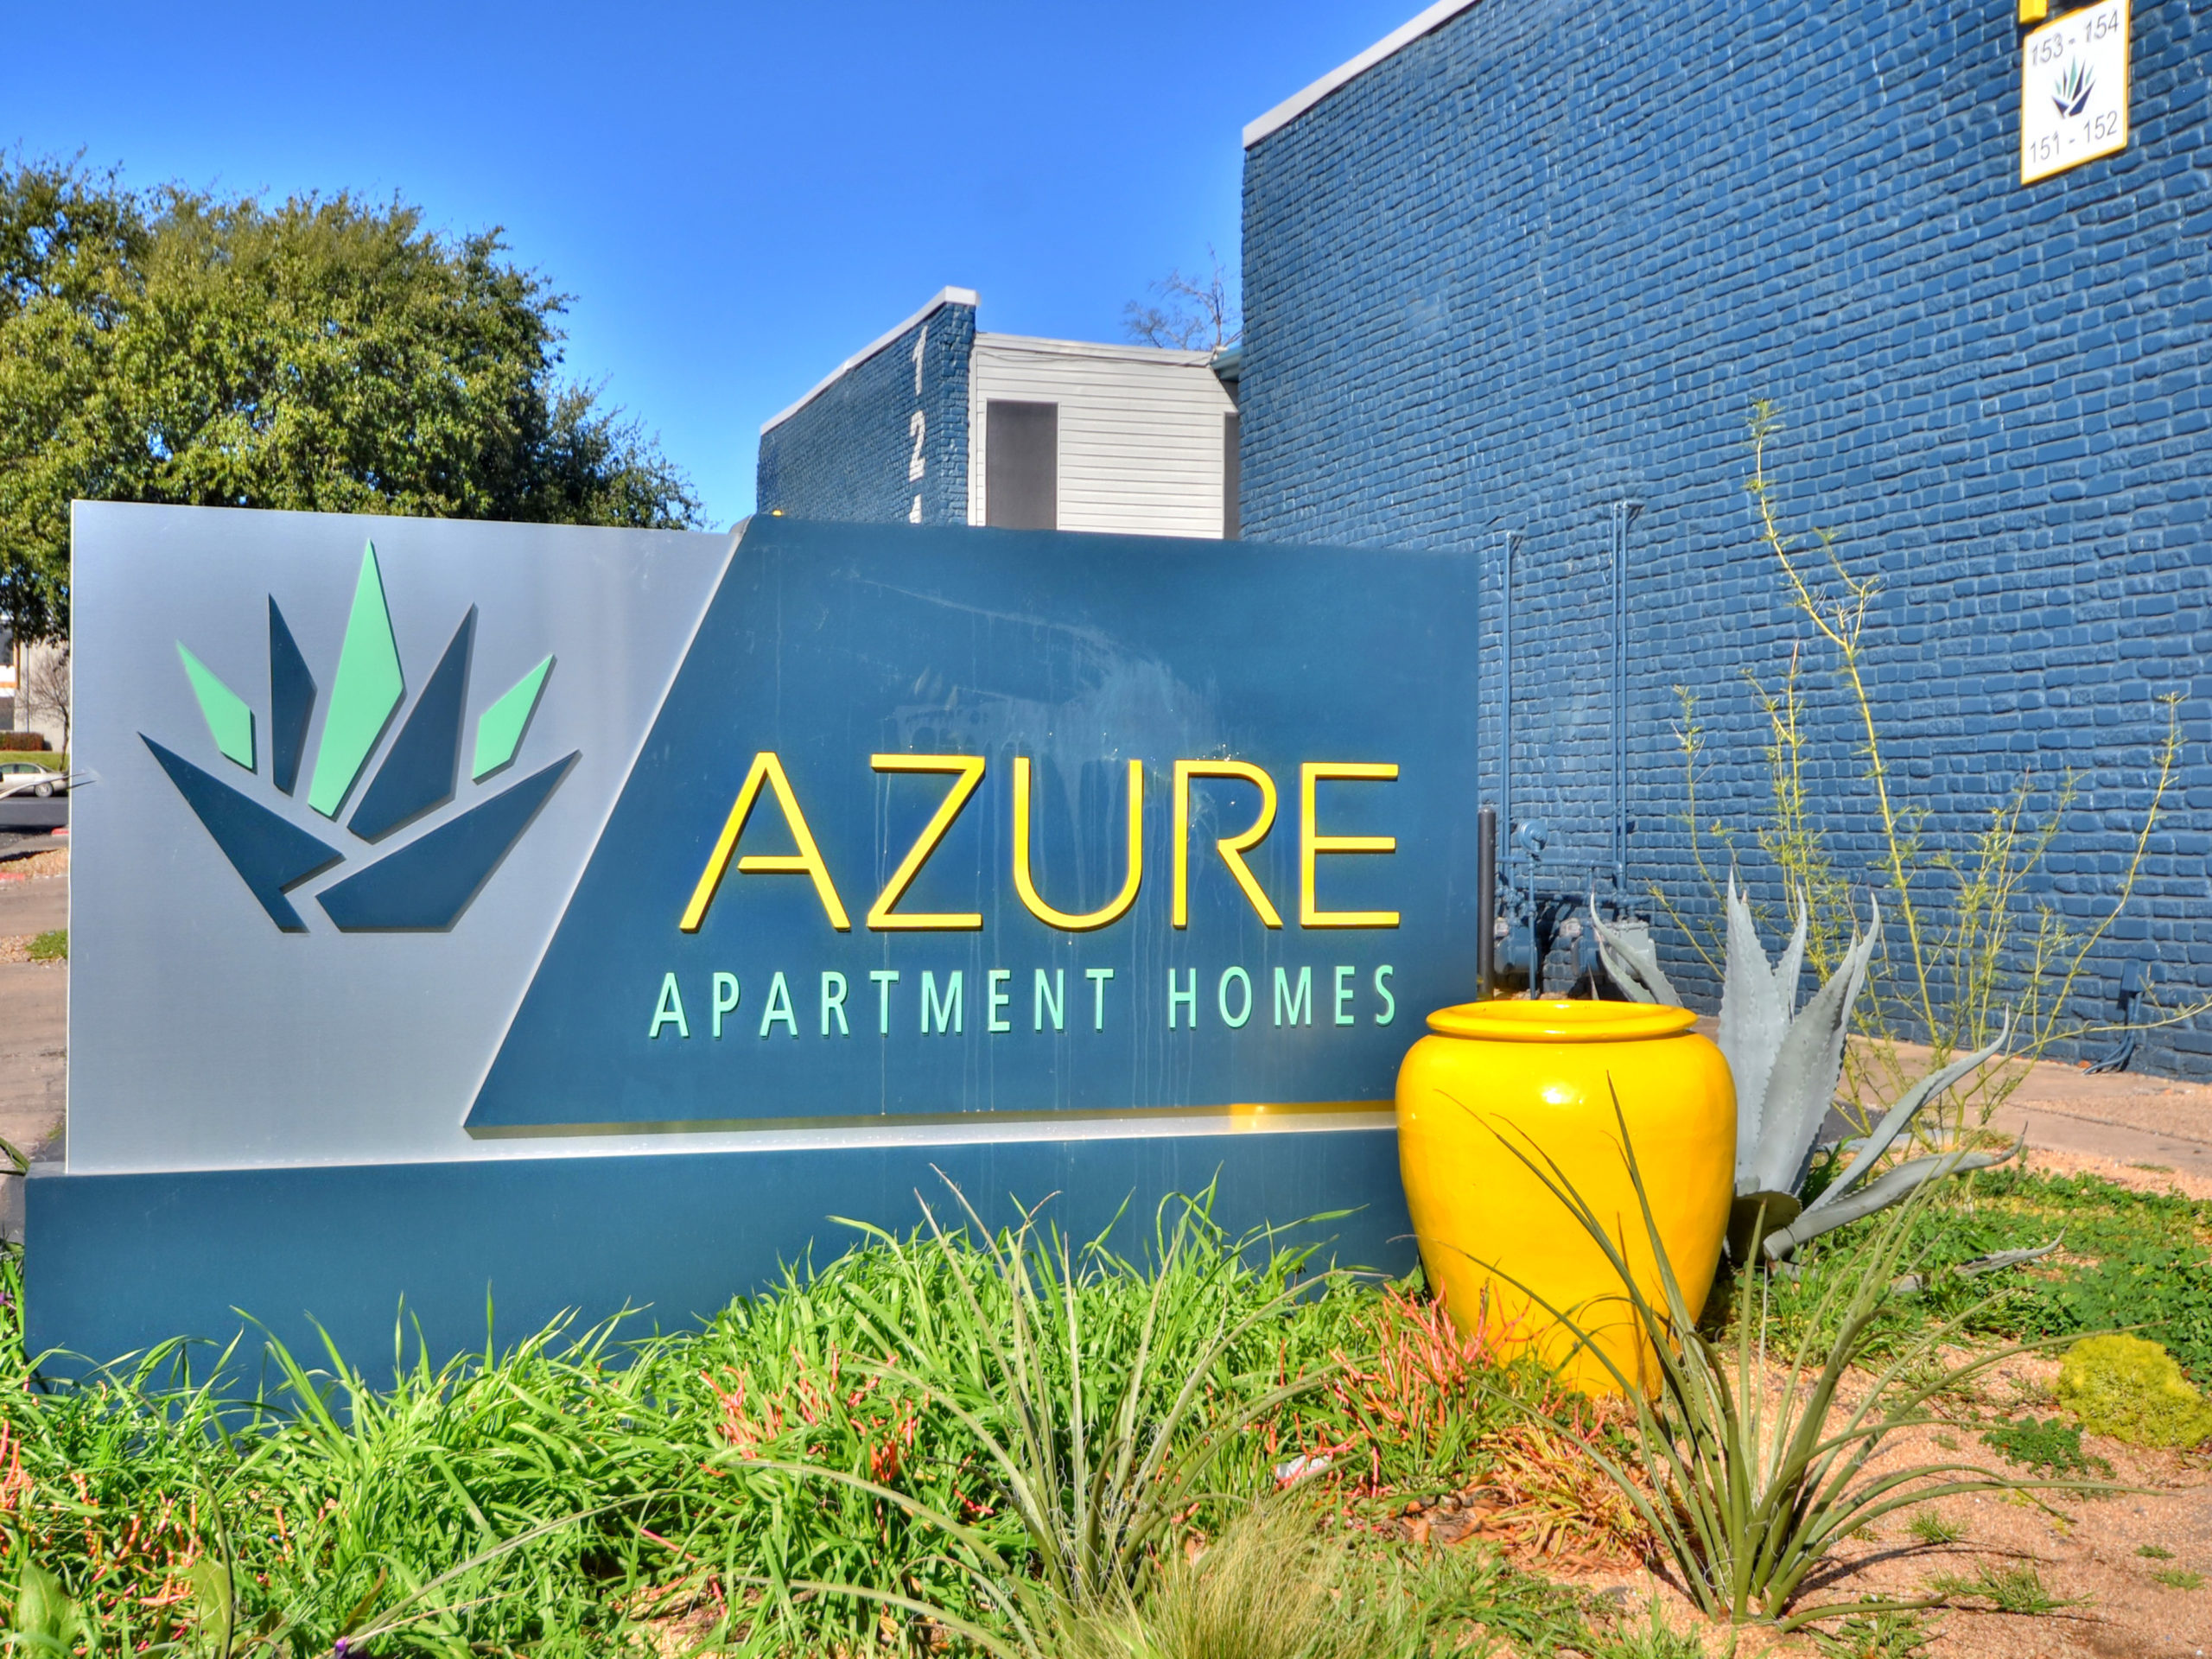 Azure-Apartments-and-Townhomes-Sign-1-scaled